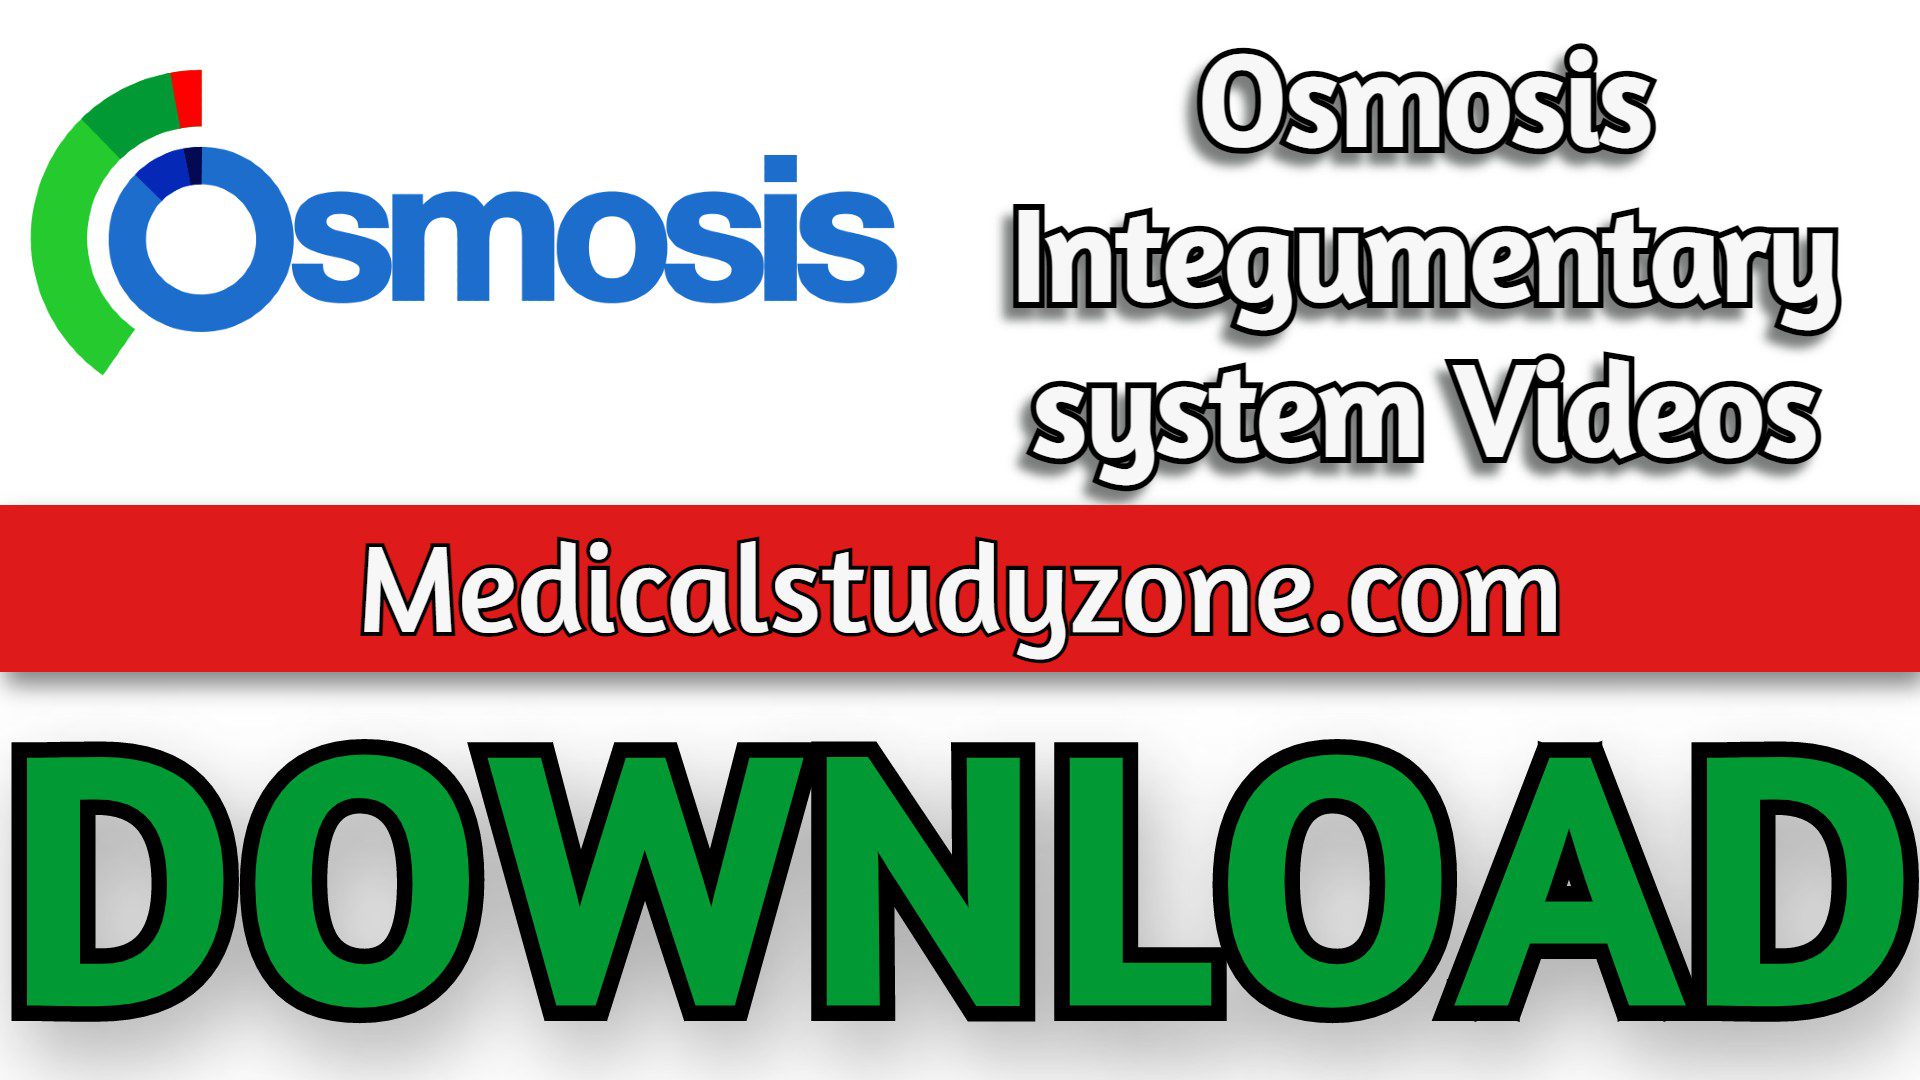 Osmosis Integumentary system Videos 2023 Free Download